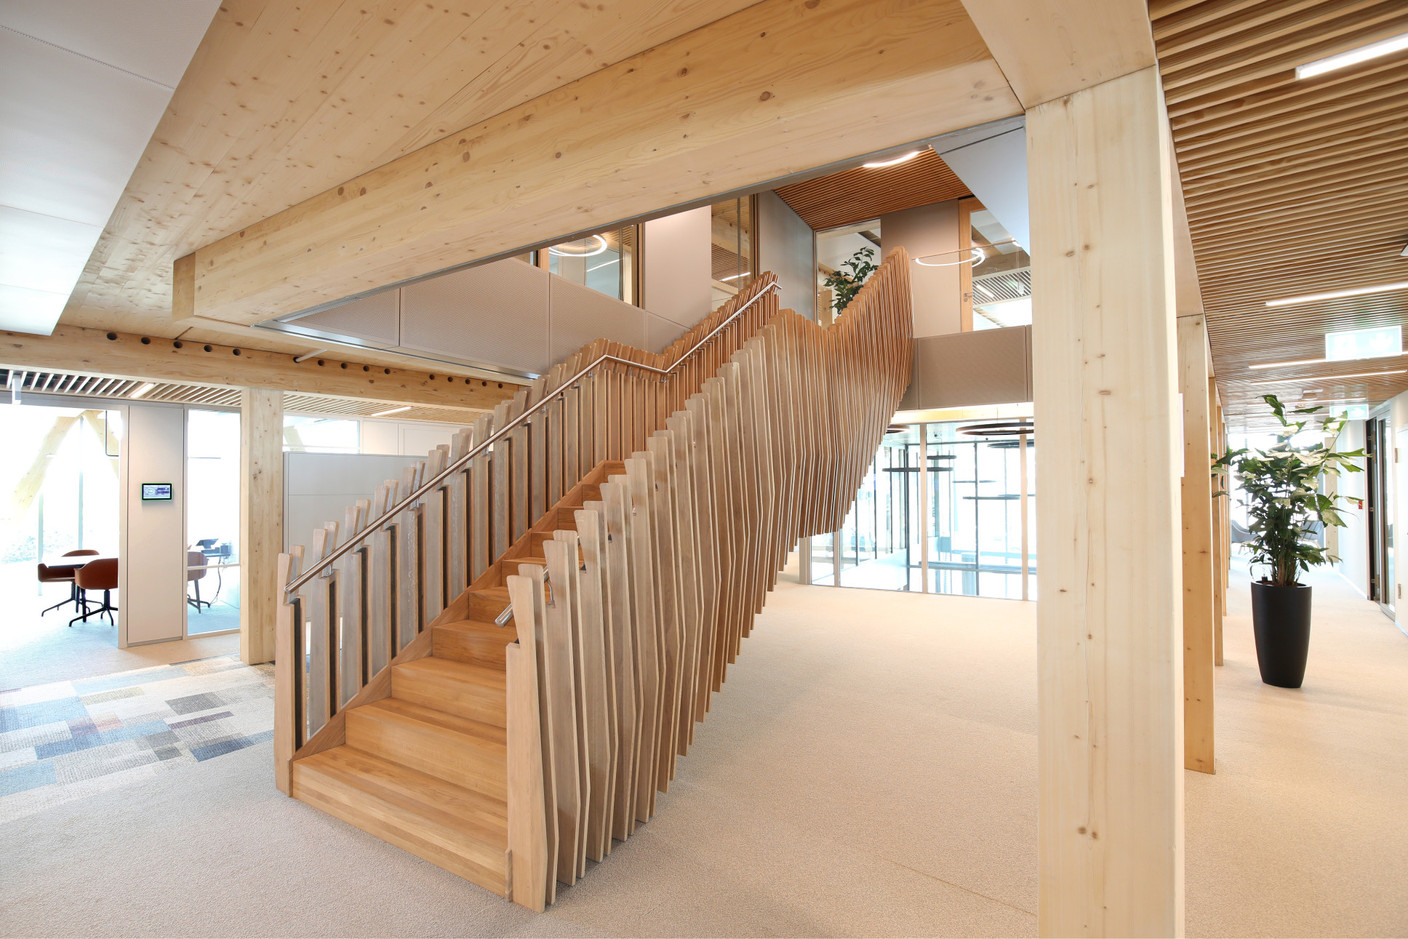 The staircase plays a key role in interior design. Photo: Bâloise